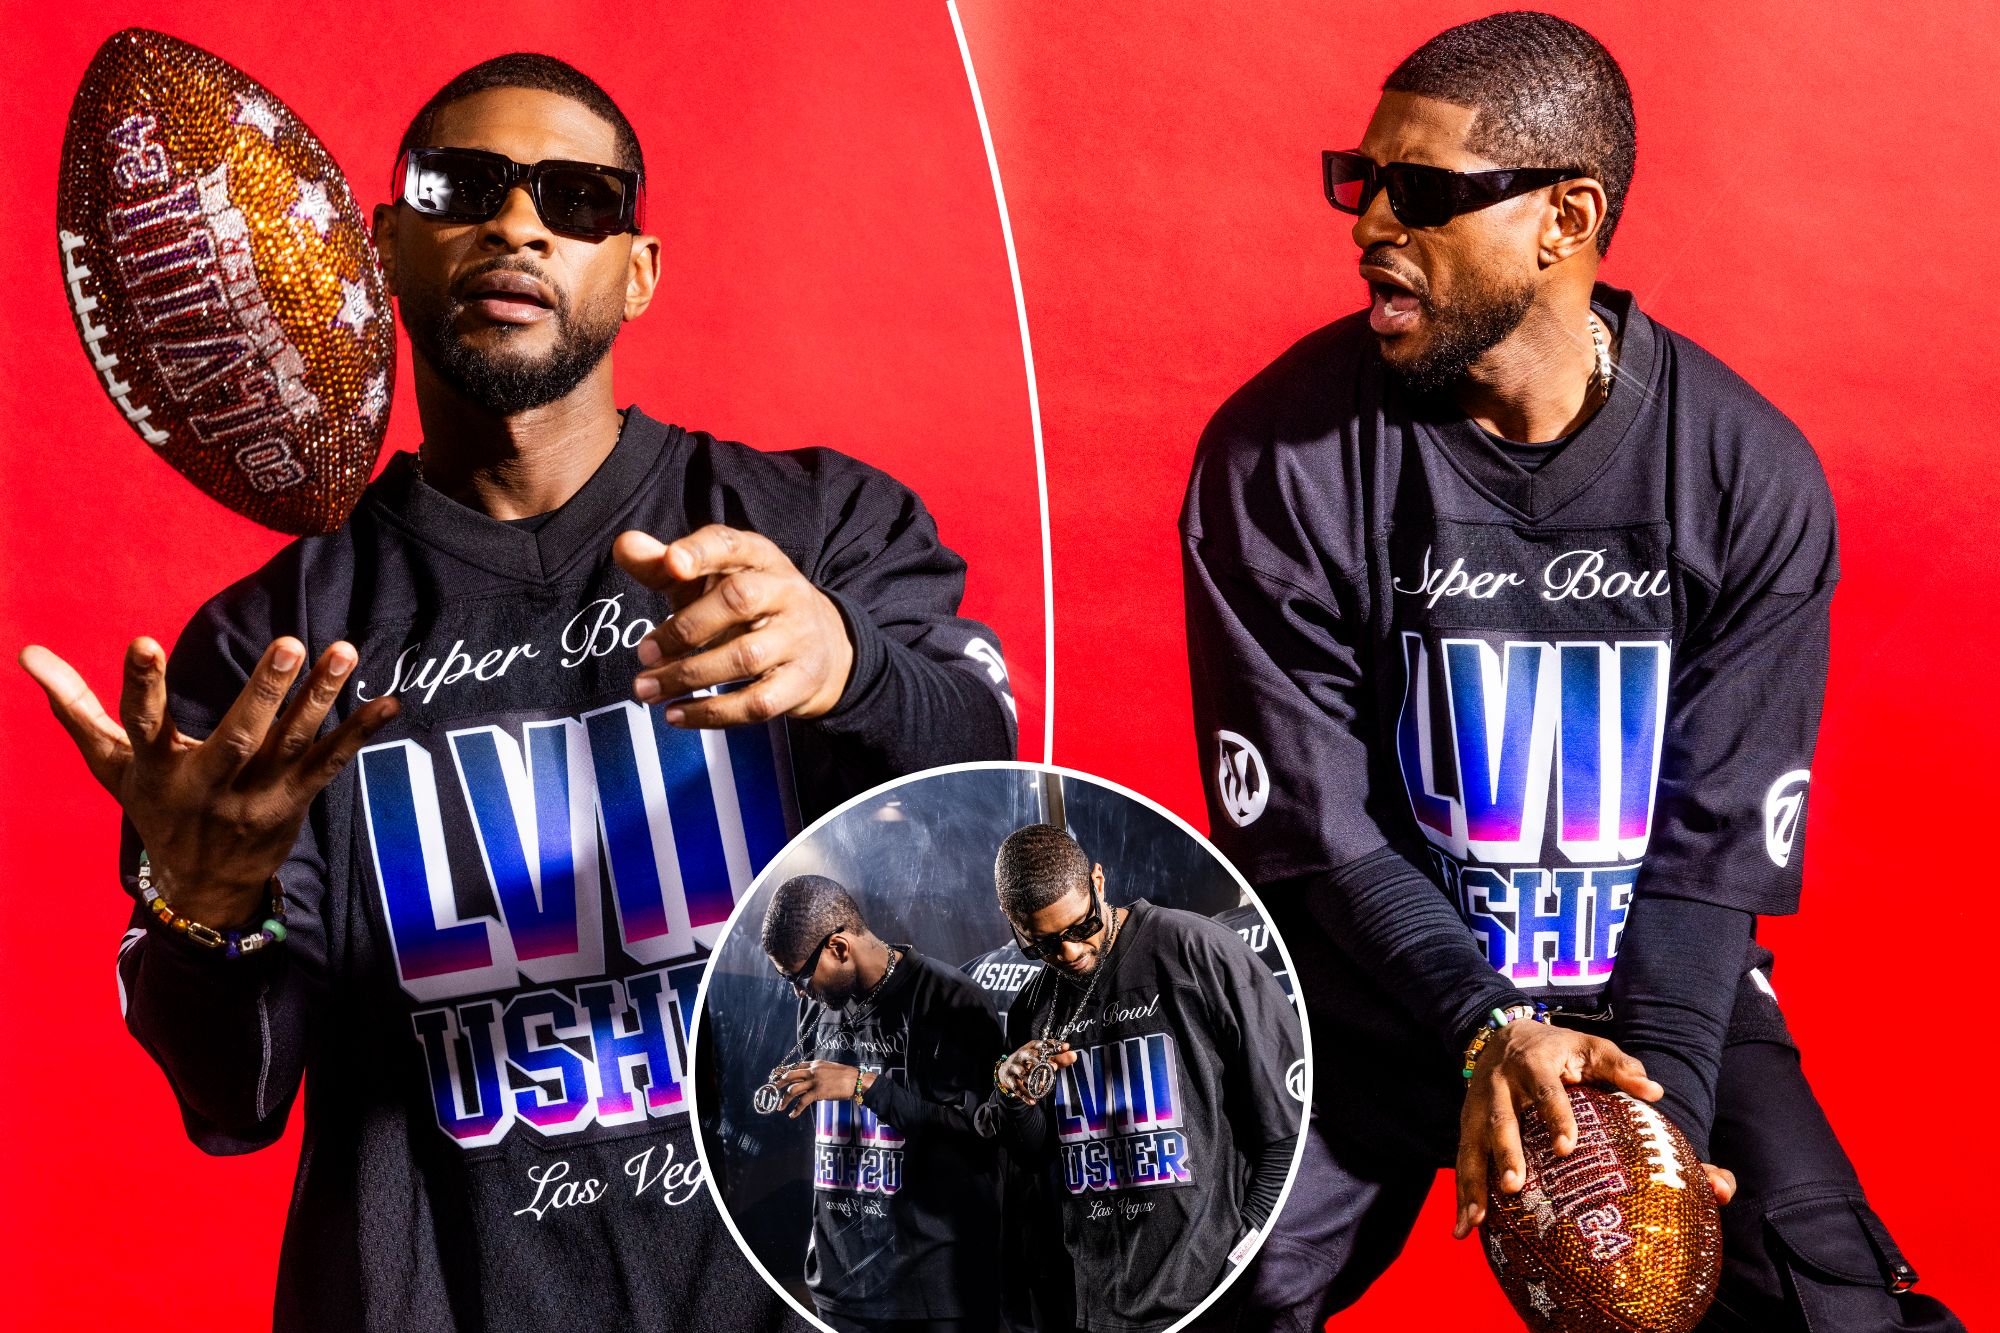 Inside Usher's blinged-out New York Post photo shoot ahead of Super Bowl LVIII halftime show